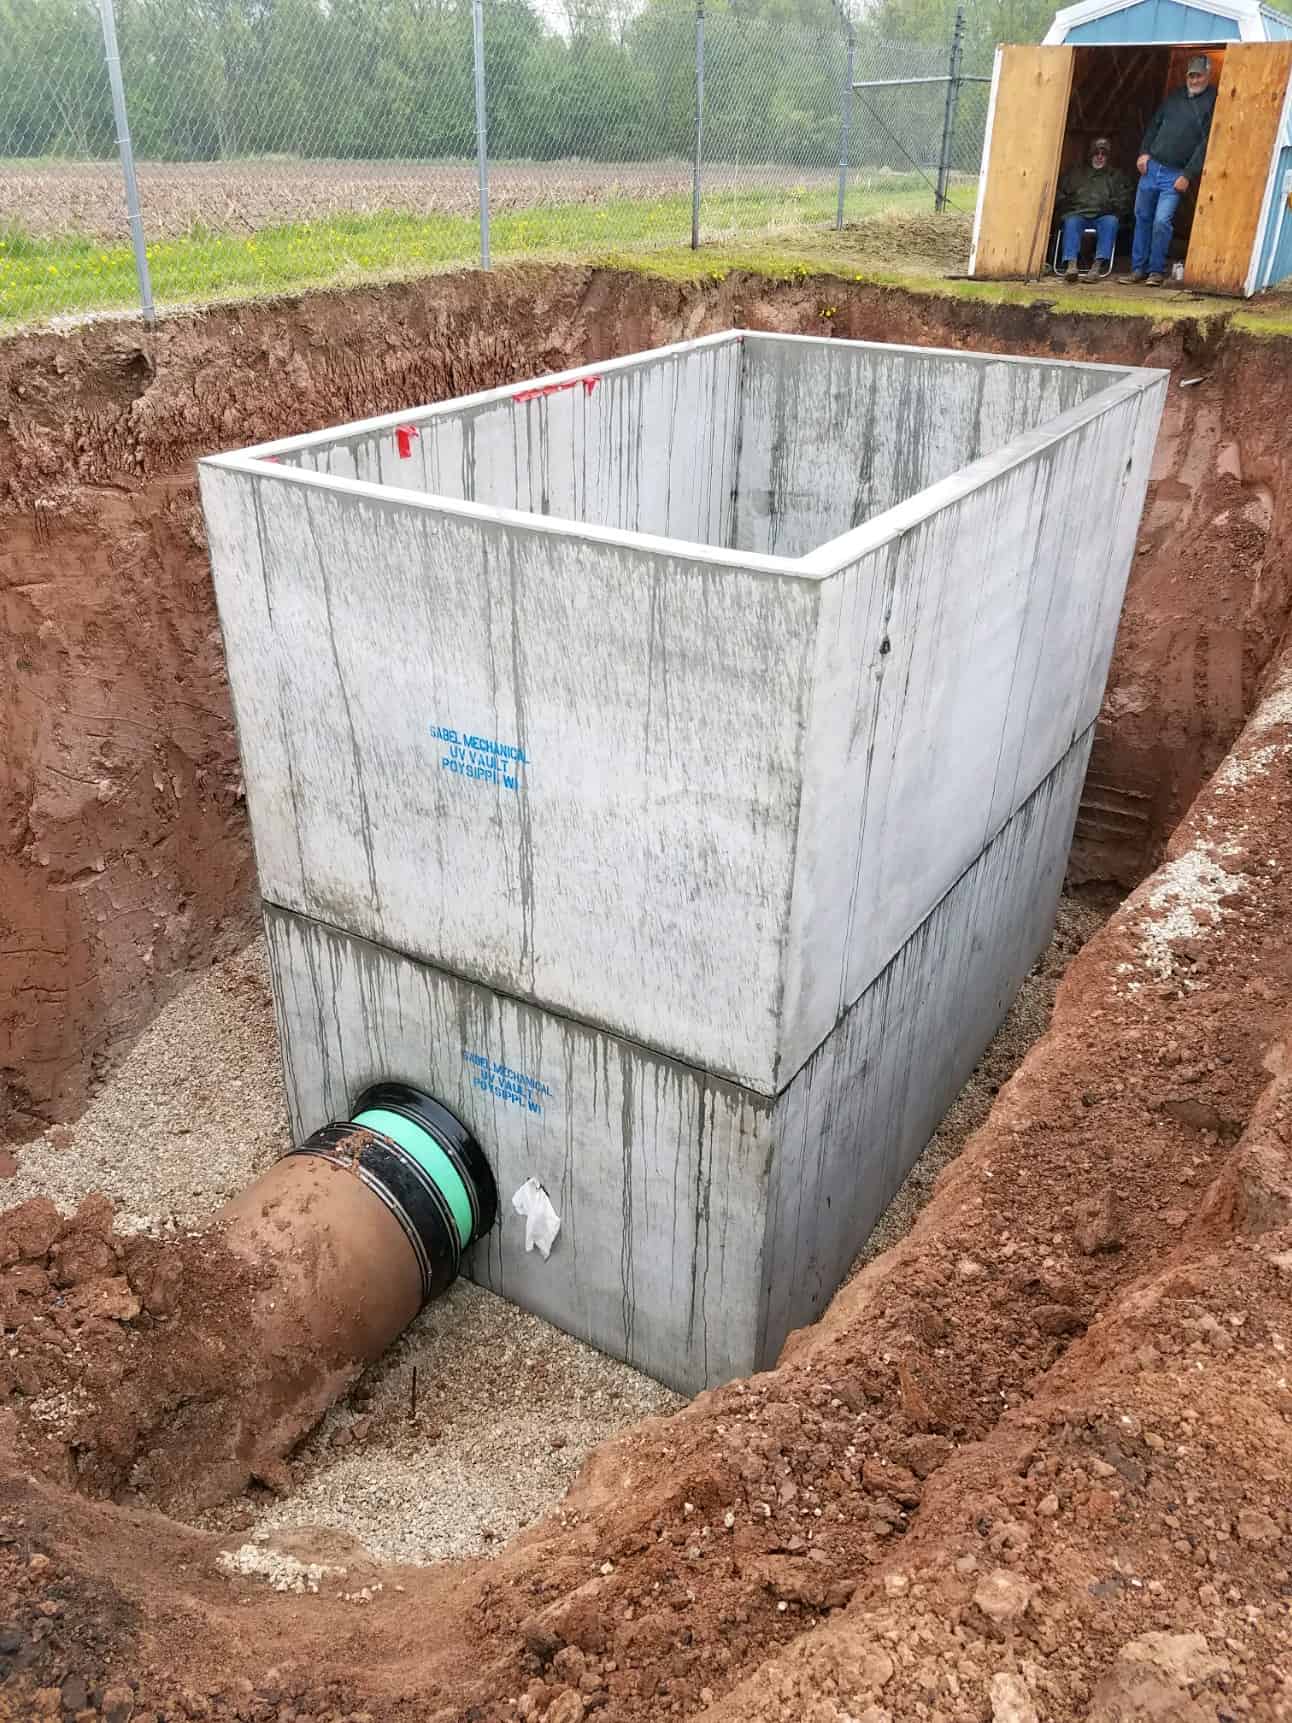 Poy Sippi UV Disinfection Vault by Wieser Concrete